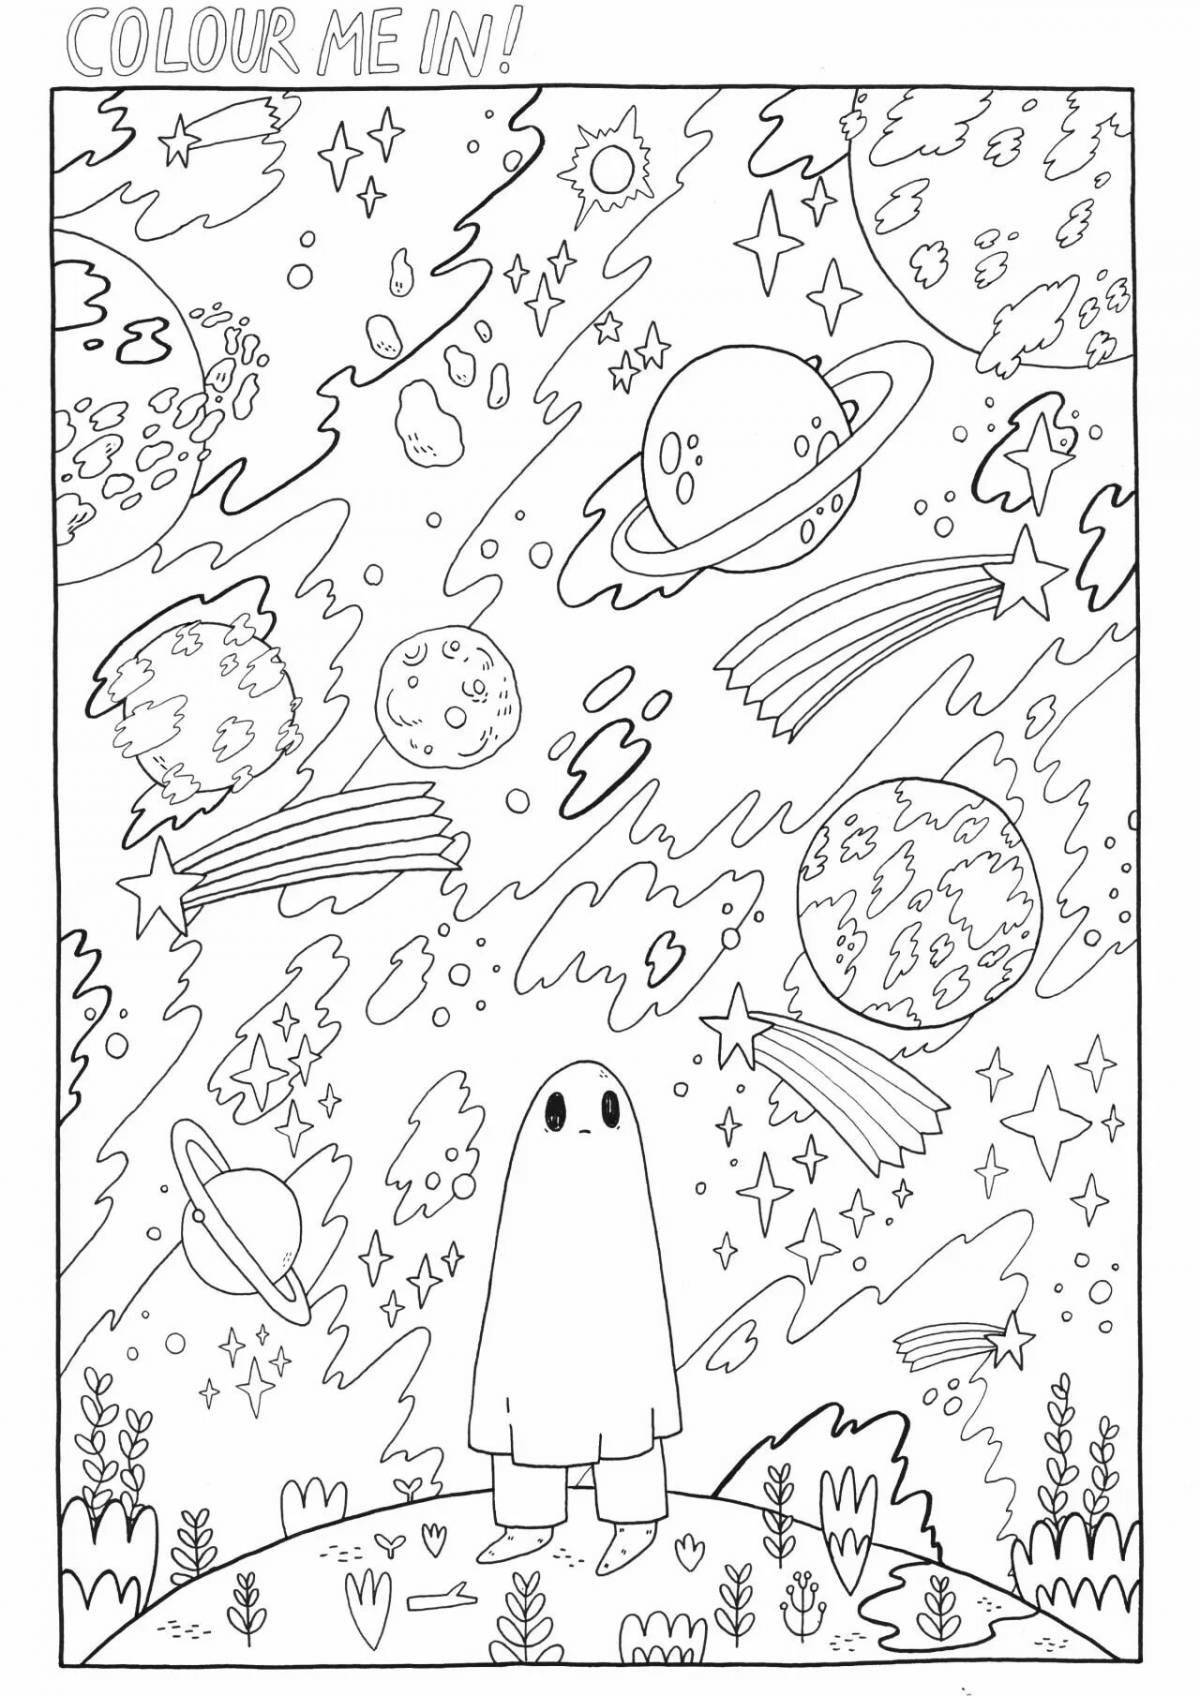 Exciting coloring poster